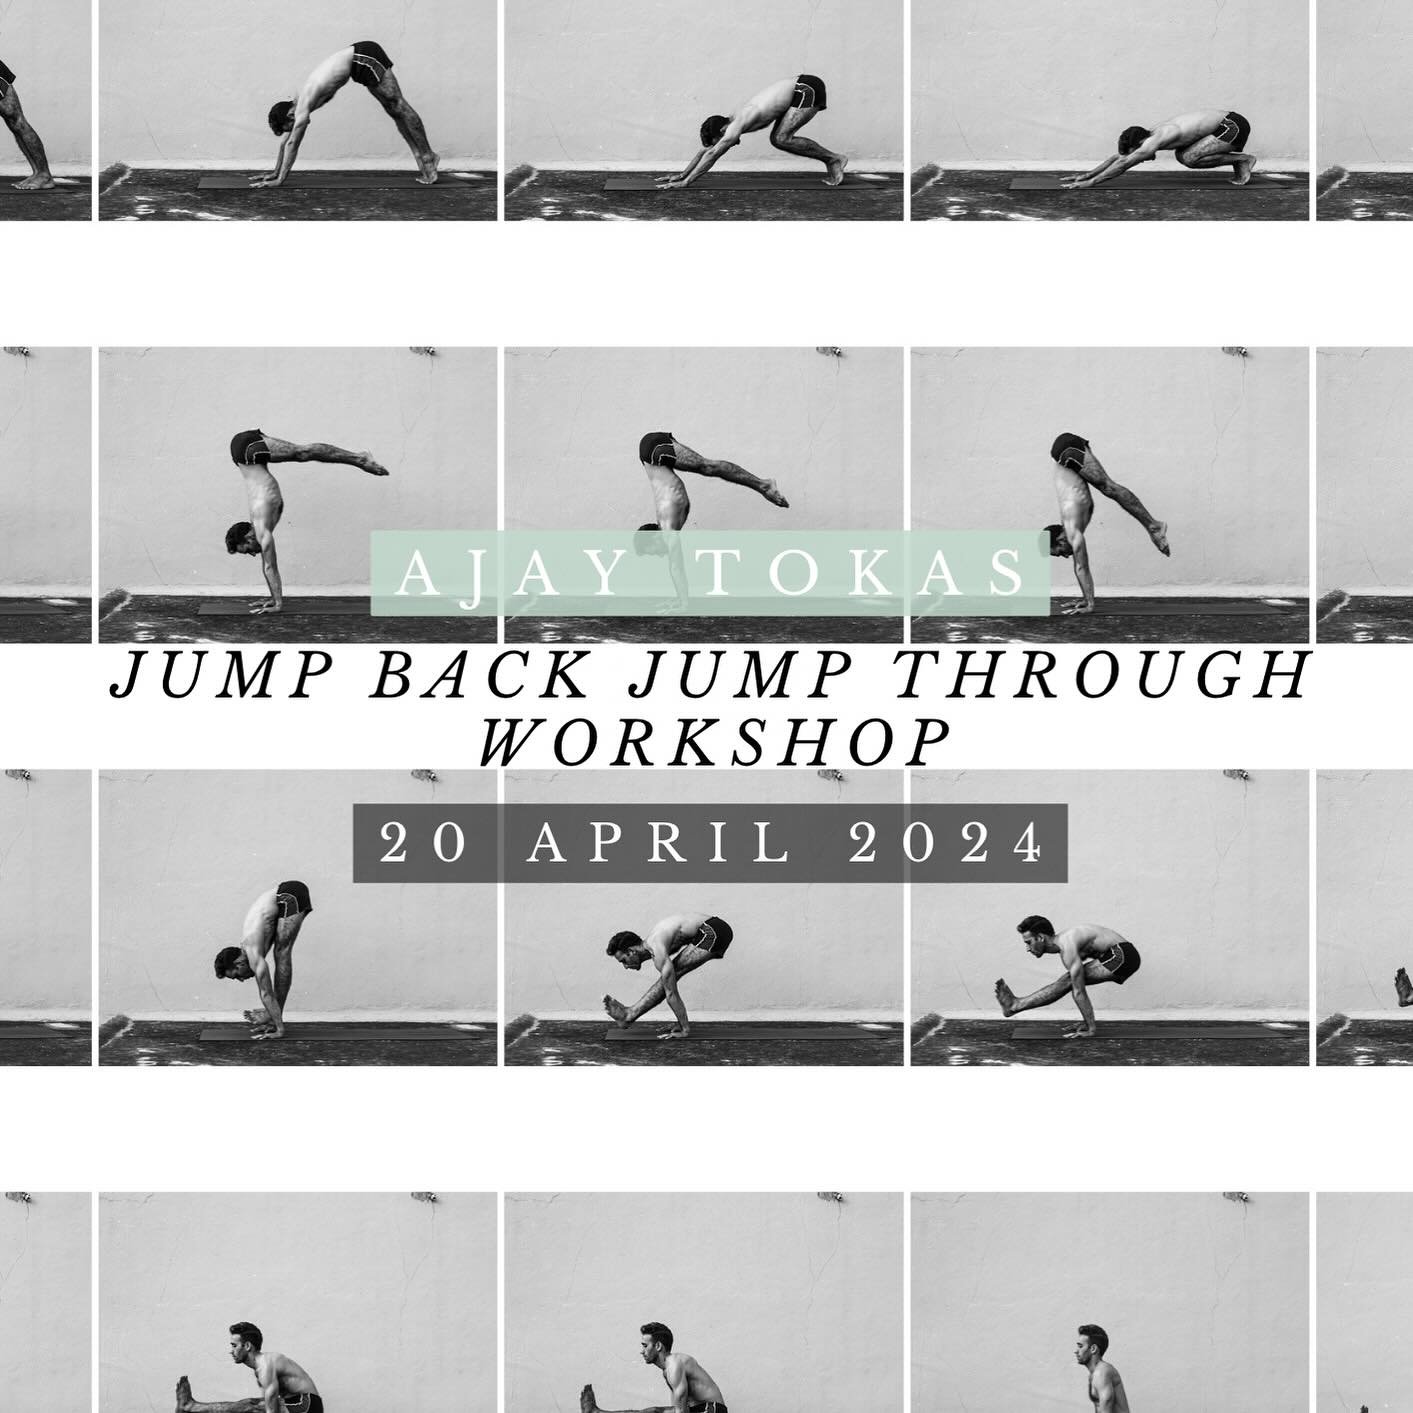 Jump back, Jump through - Transitions of Ashtanga Yoga Workshop @ajaytokas 

Fly or float , straight arms or bent, cross legs or straight, lift up but HOW?
Where to focus, where to get the strength, what to do? All the answers and more details about 